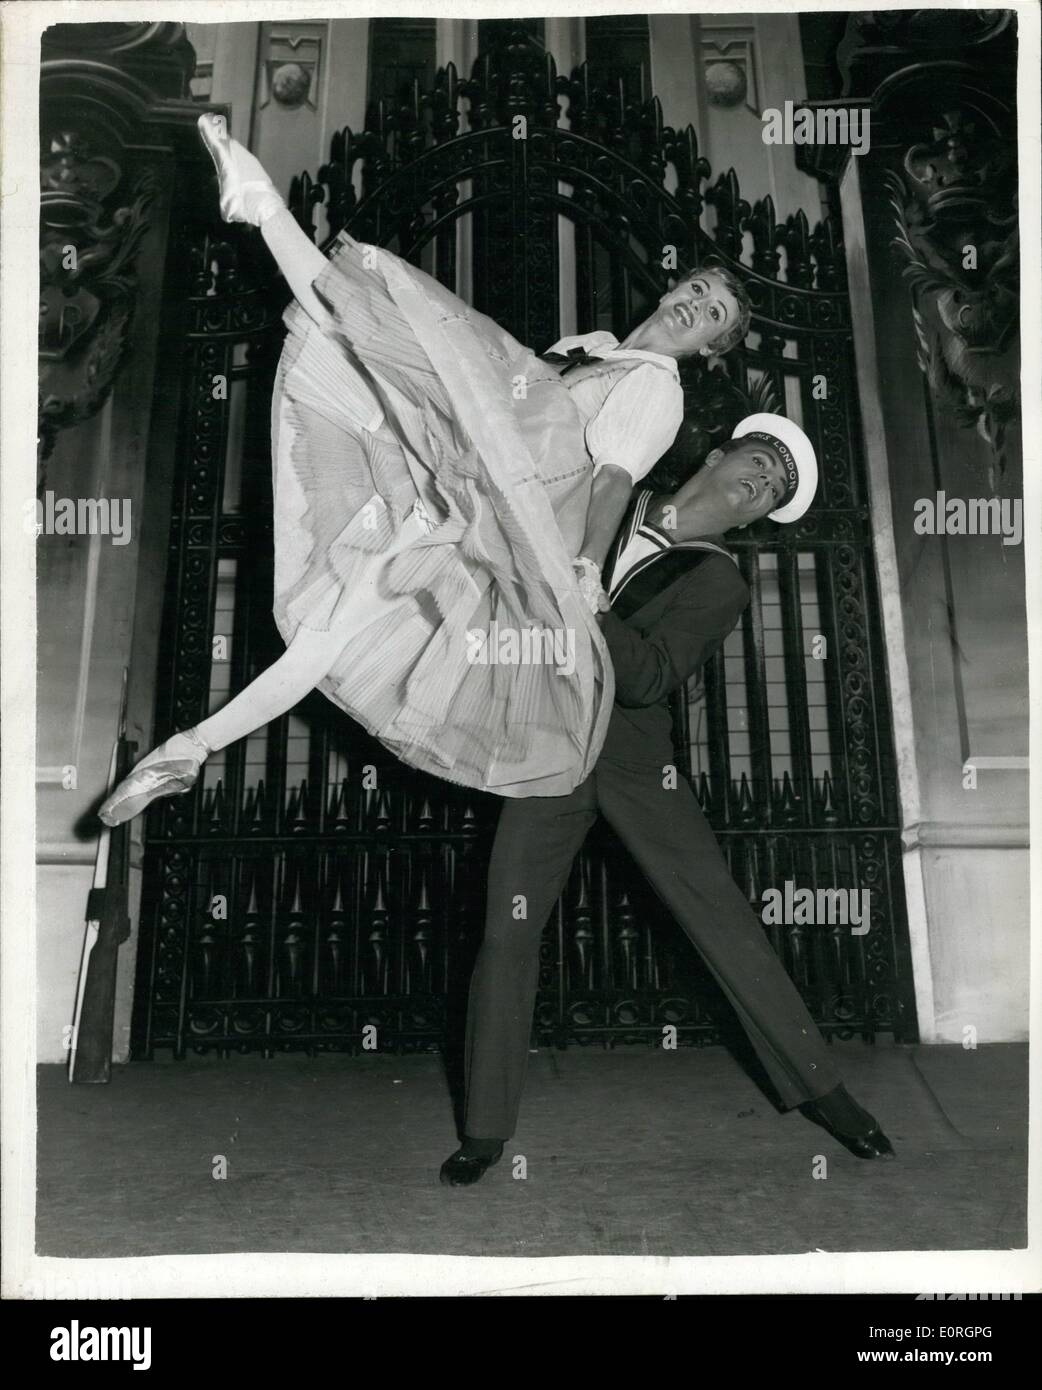 Jul. 07, 1959 - Noel Coward Ballet Rehearsal: A rehearsal was held this morning of the Noel Coward ballet ''London Morning'' which opens this evening at Royal Festival Hall. Photo shows John Gilpin and Jeannette Minty during the rehearsal today. Stock Photo